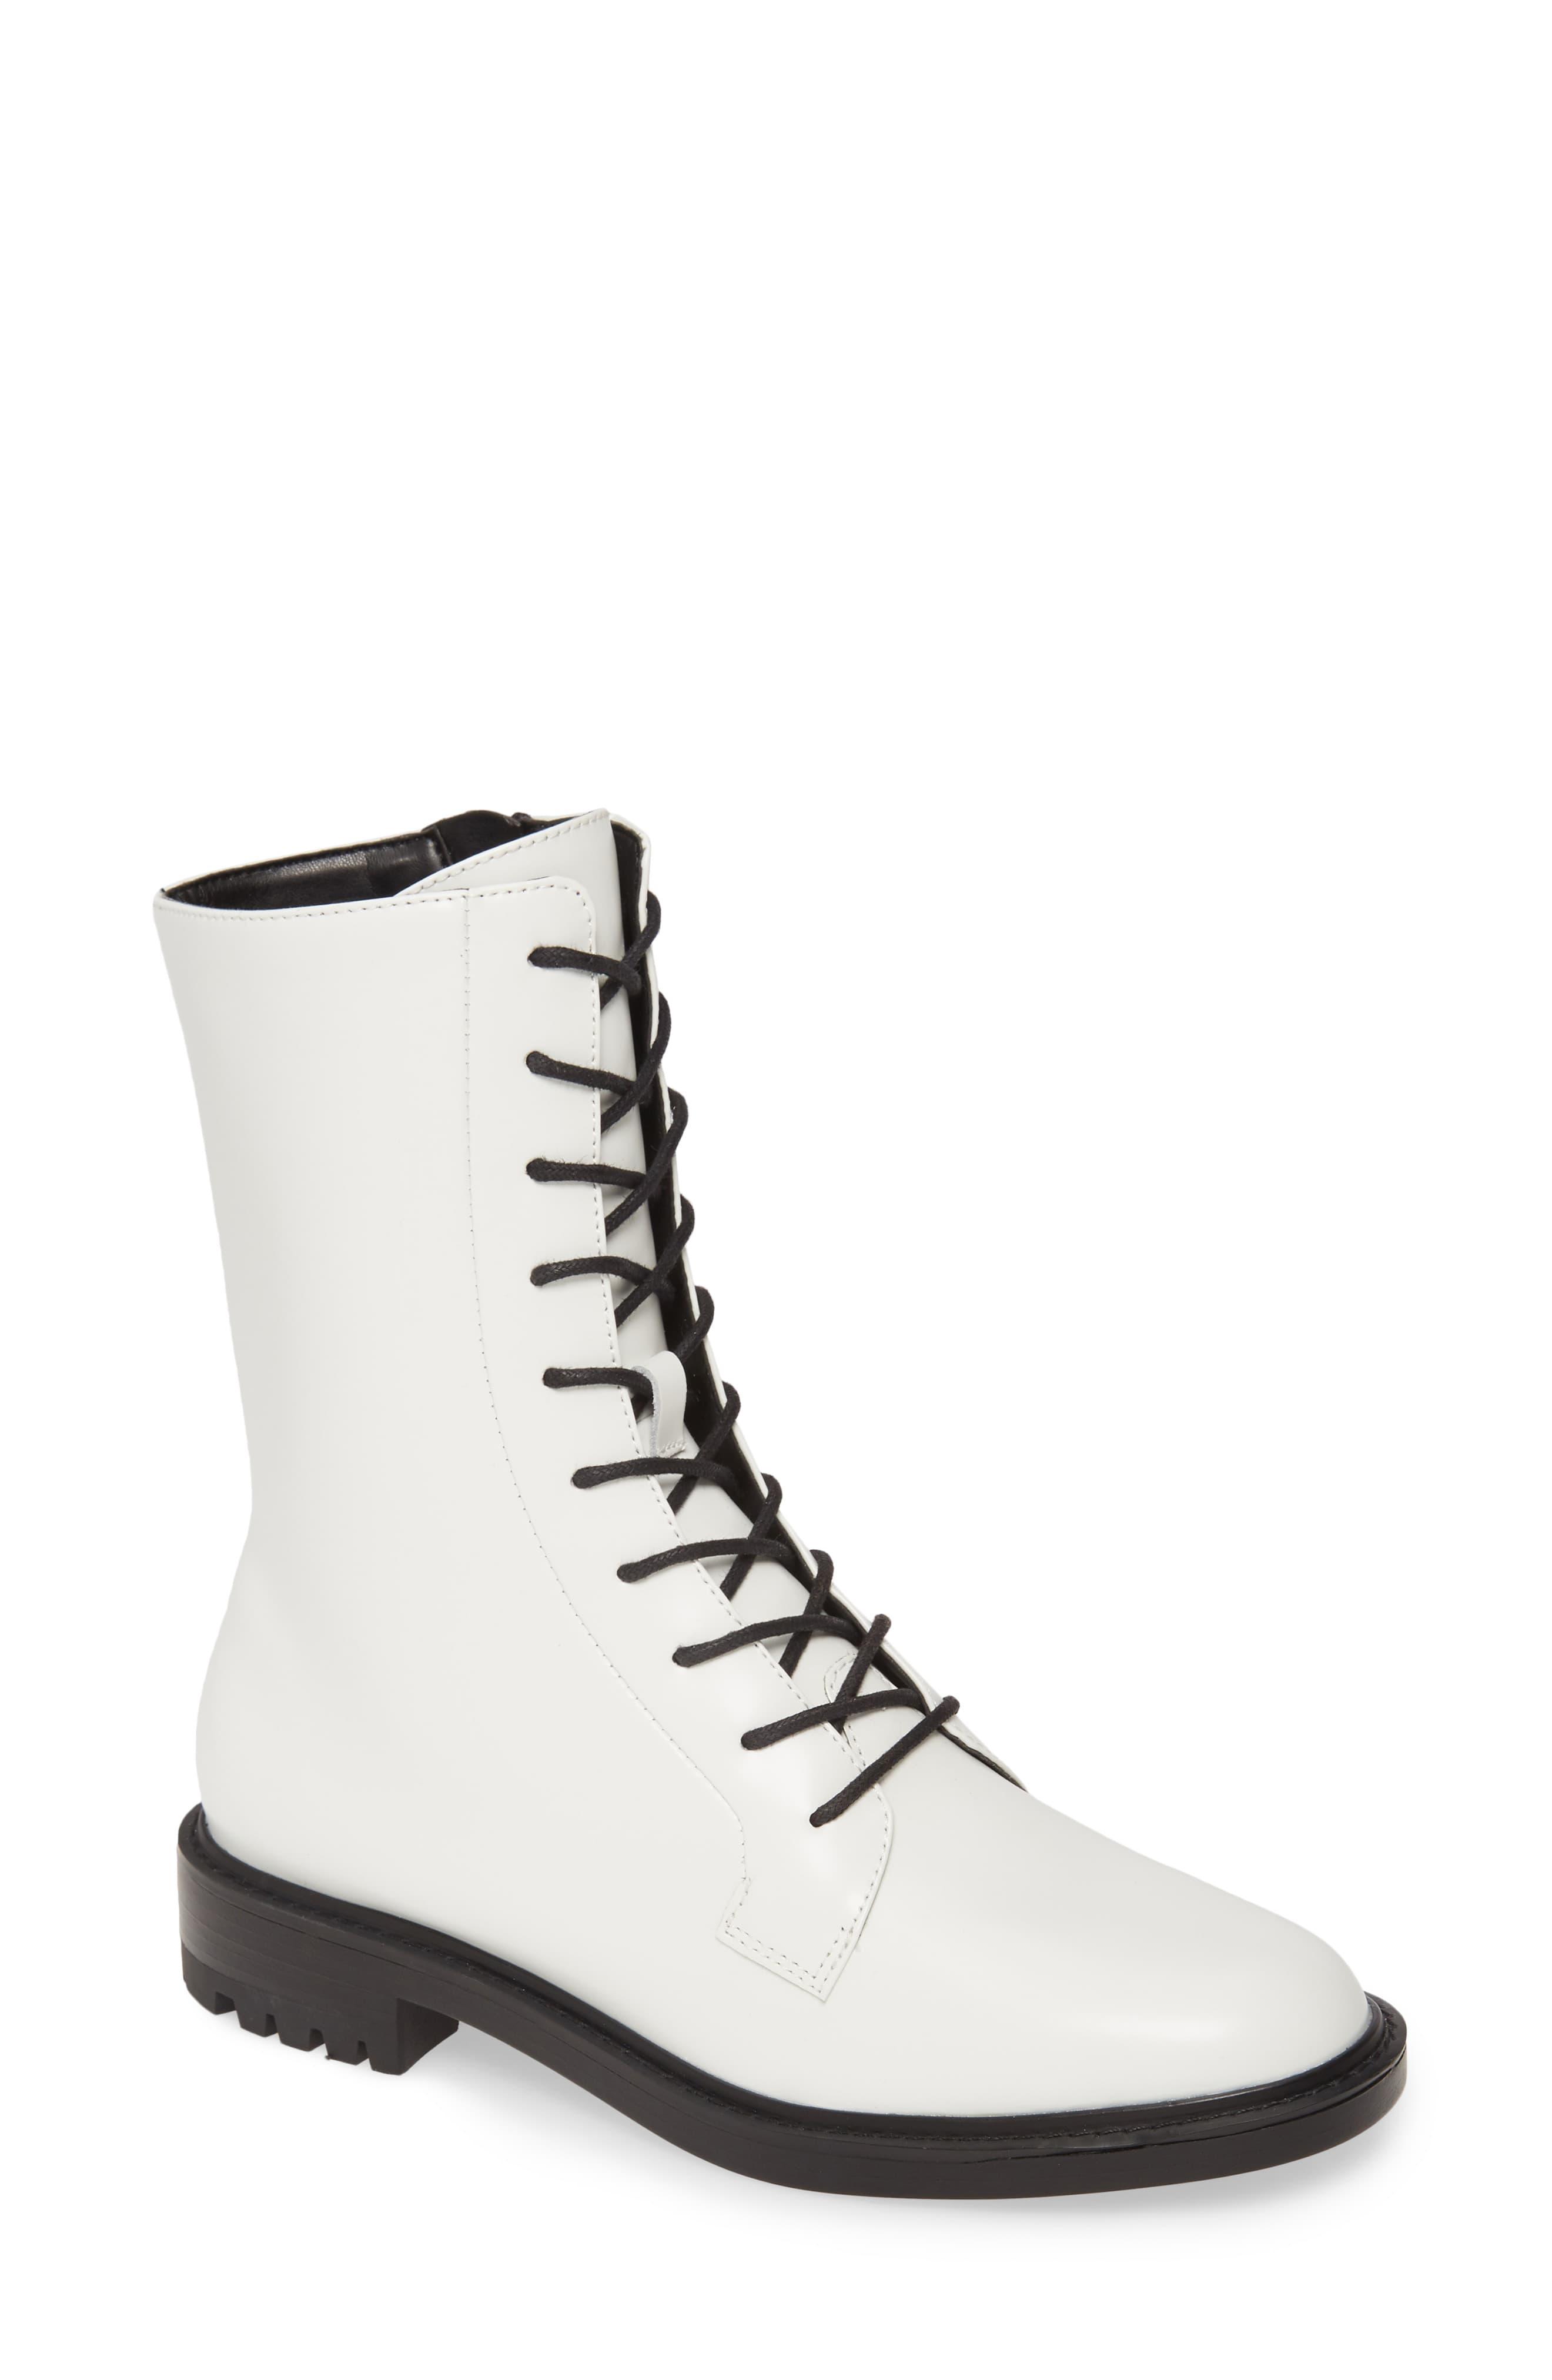 Steve Madden Brant Lace-up Boot in White - Lyst